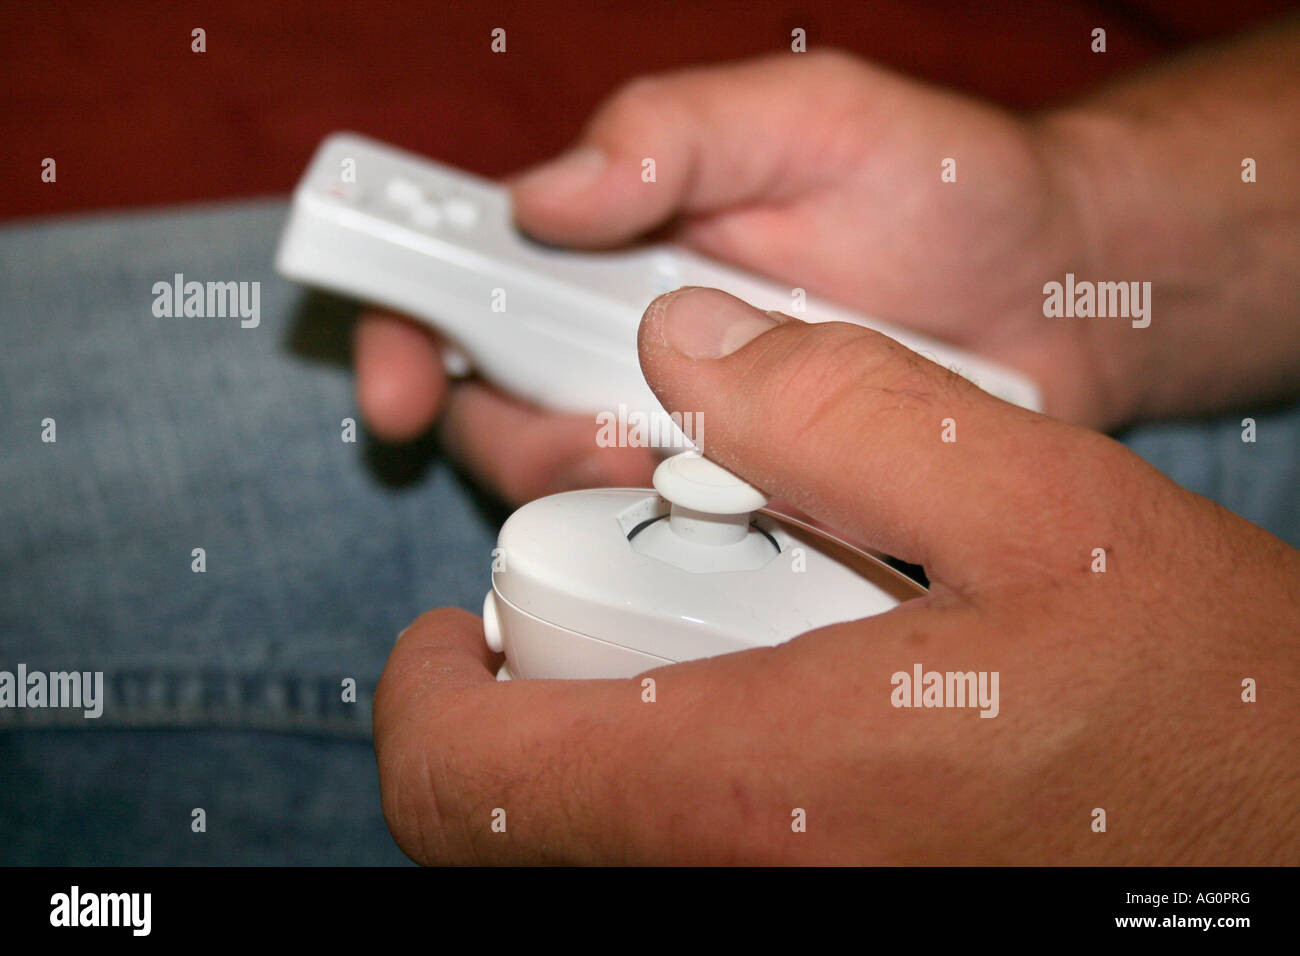 male hand holding Nintendo Wii remote control Stock Photo